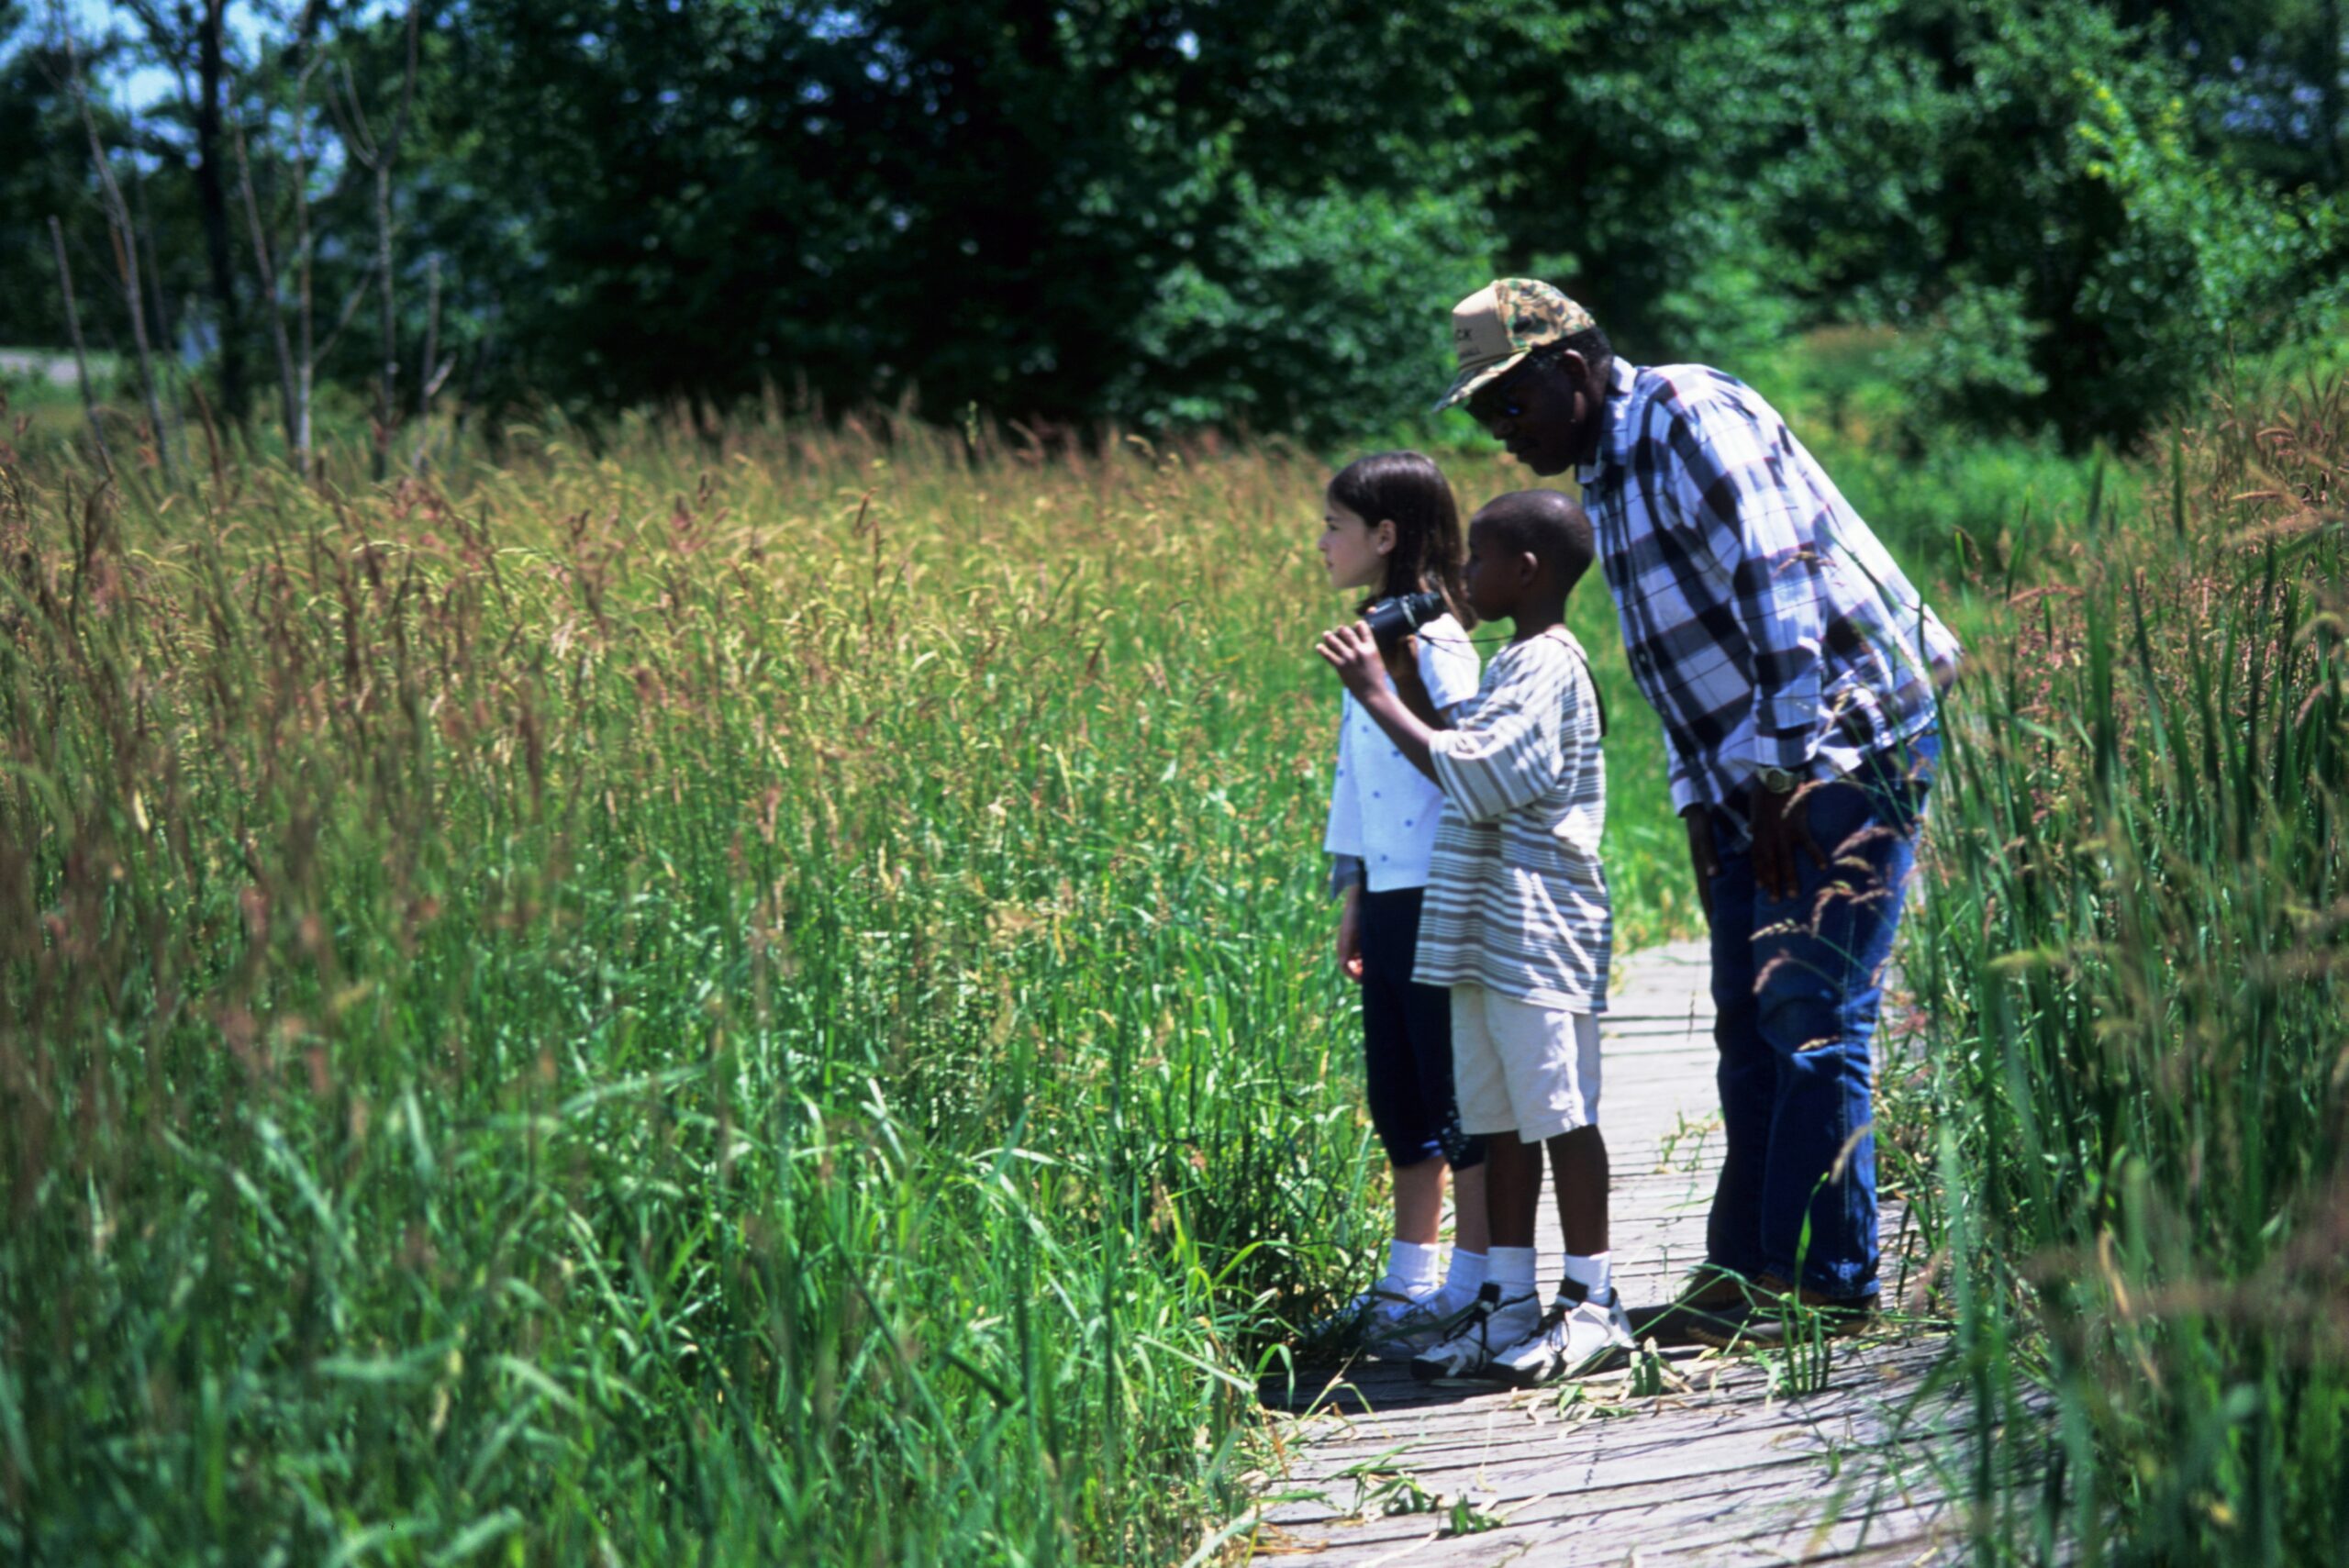 Young children learn about wetland ecology at Aldo Leopold Center